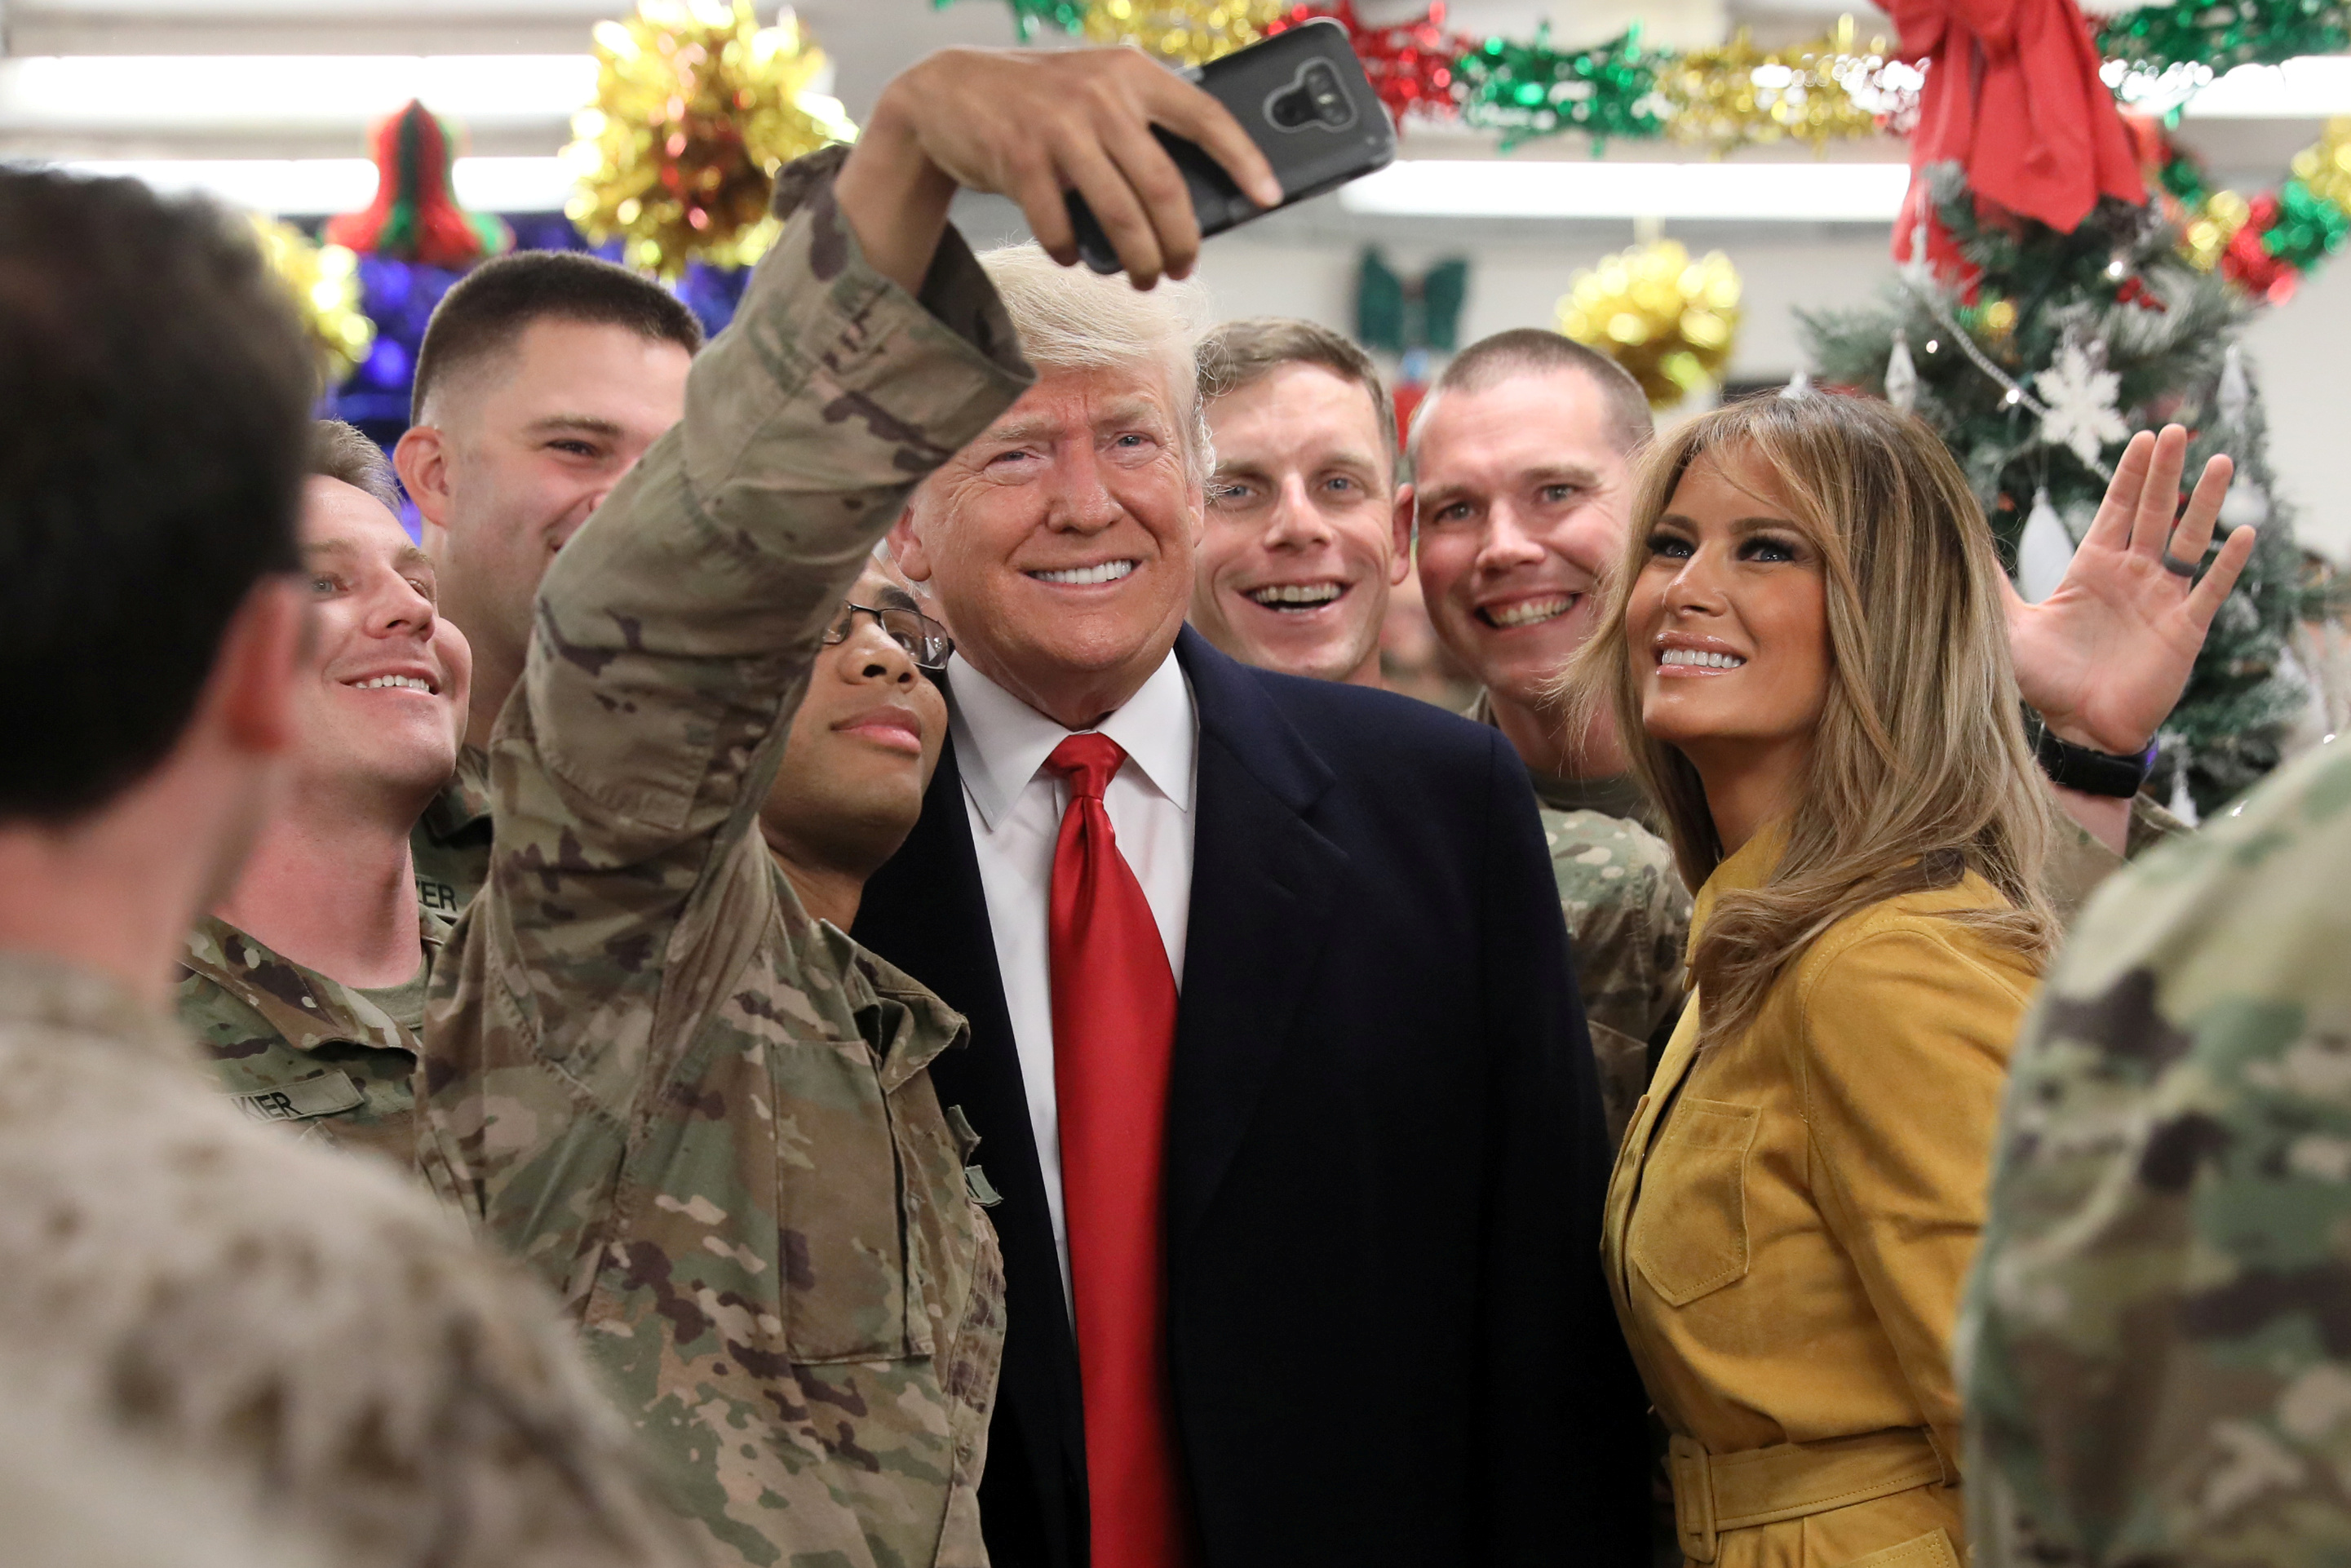 U.S. President Donald Trump and First Lady Melania Trump greet military personnel at the dining facility during an unannounced visit to Al Asad Air Base, Iraq December 26, 2018. REUTERS/Jonathan Ernst 